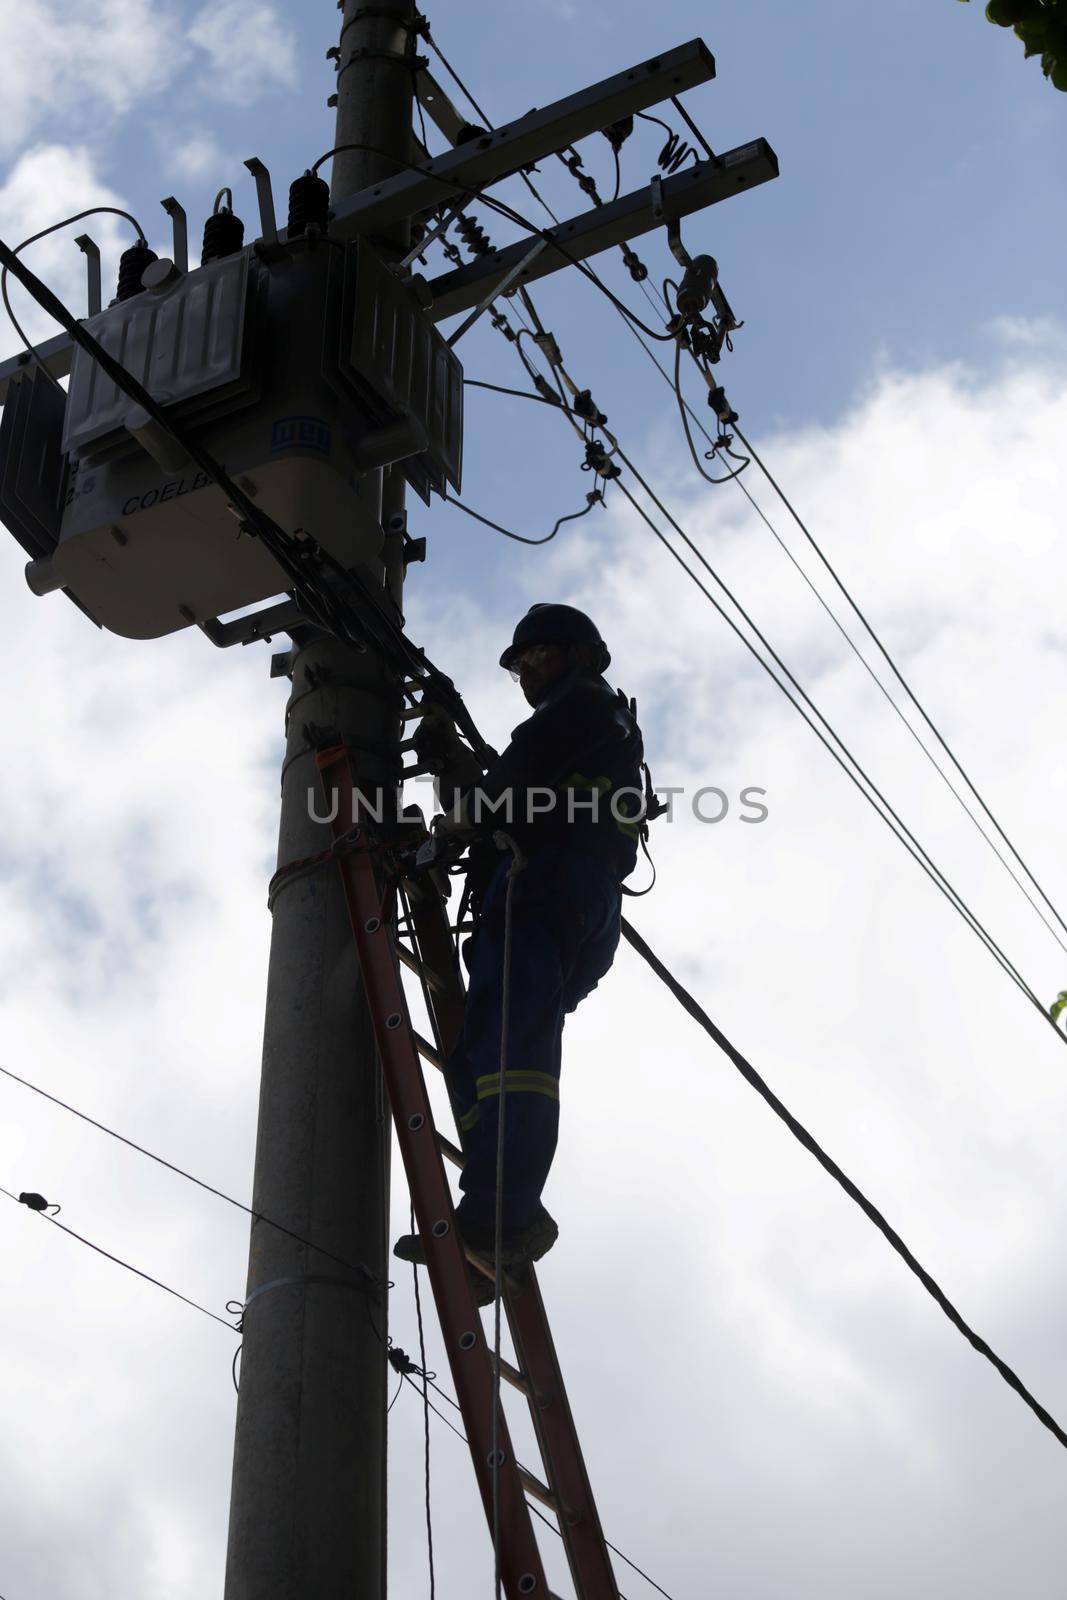 maintenance of electric network in salvador by joasouza